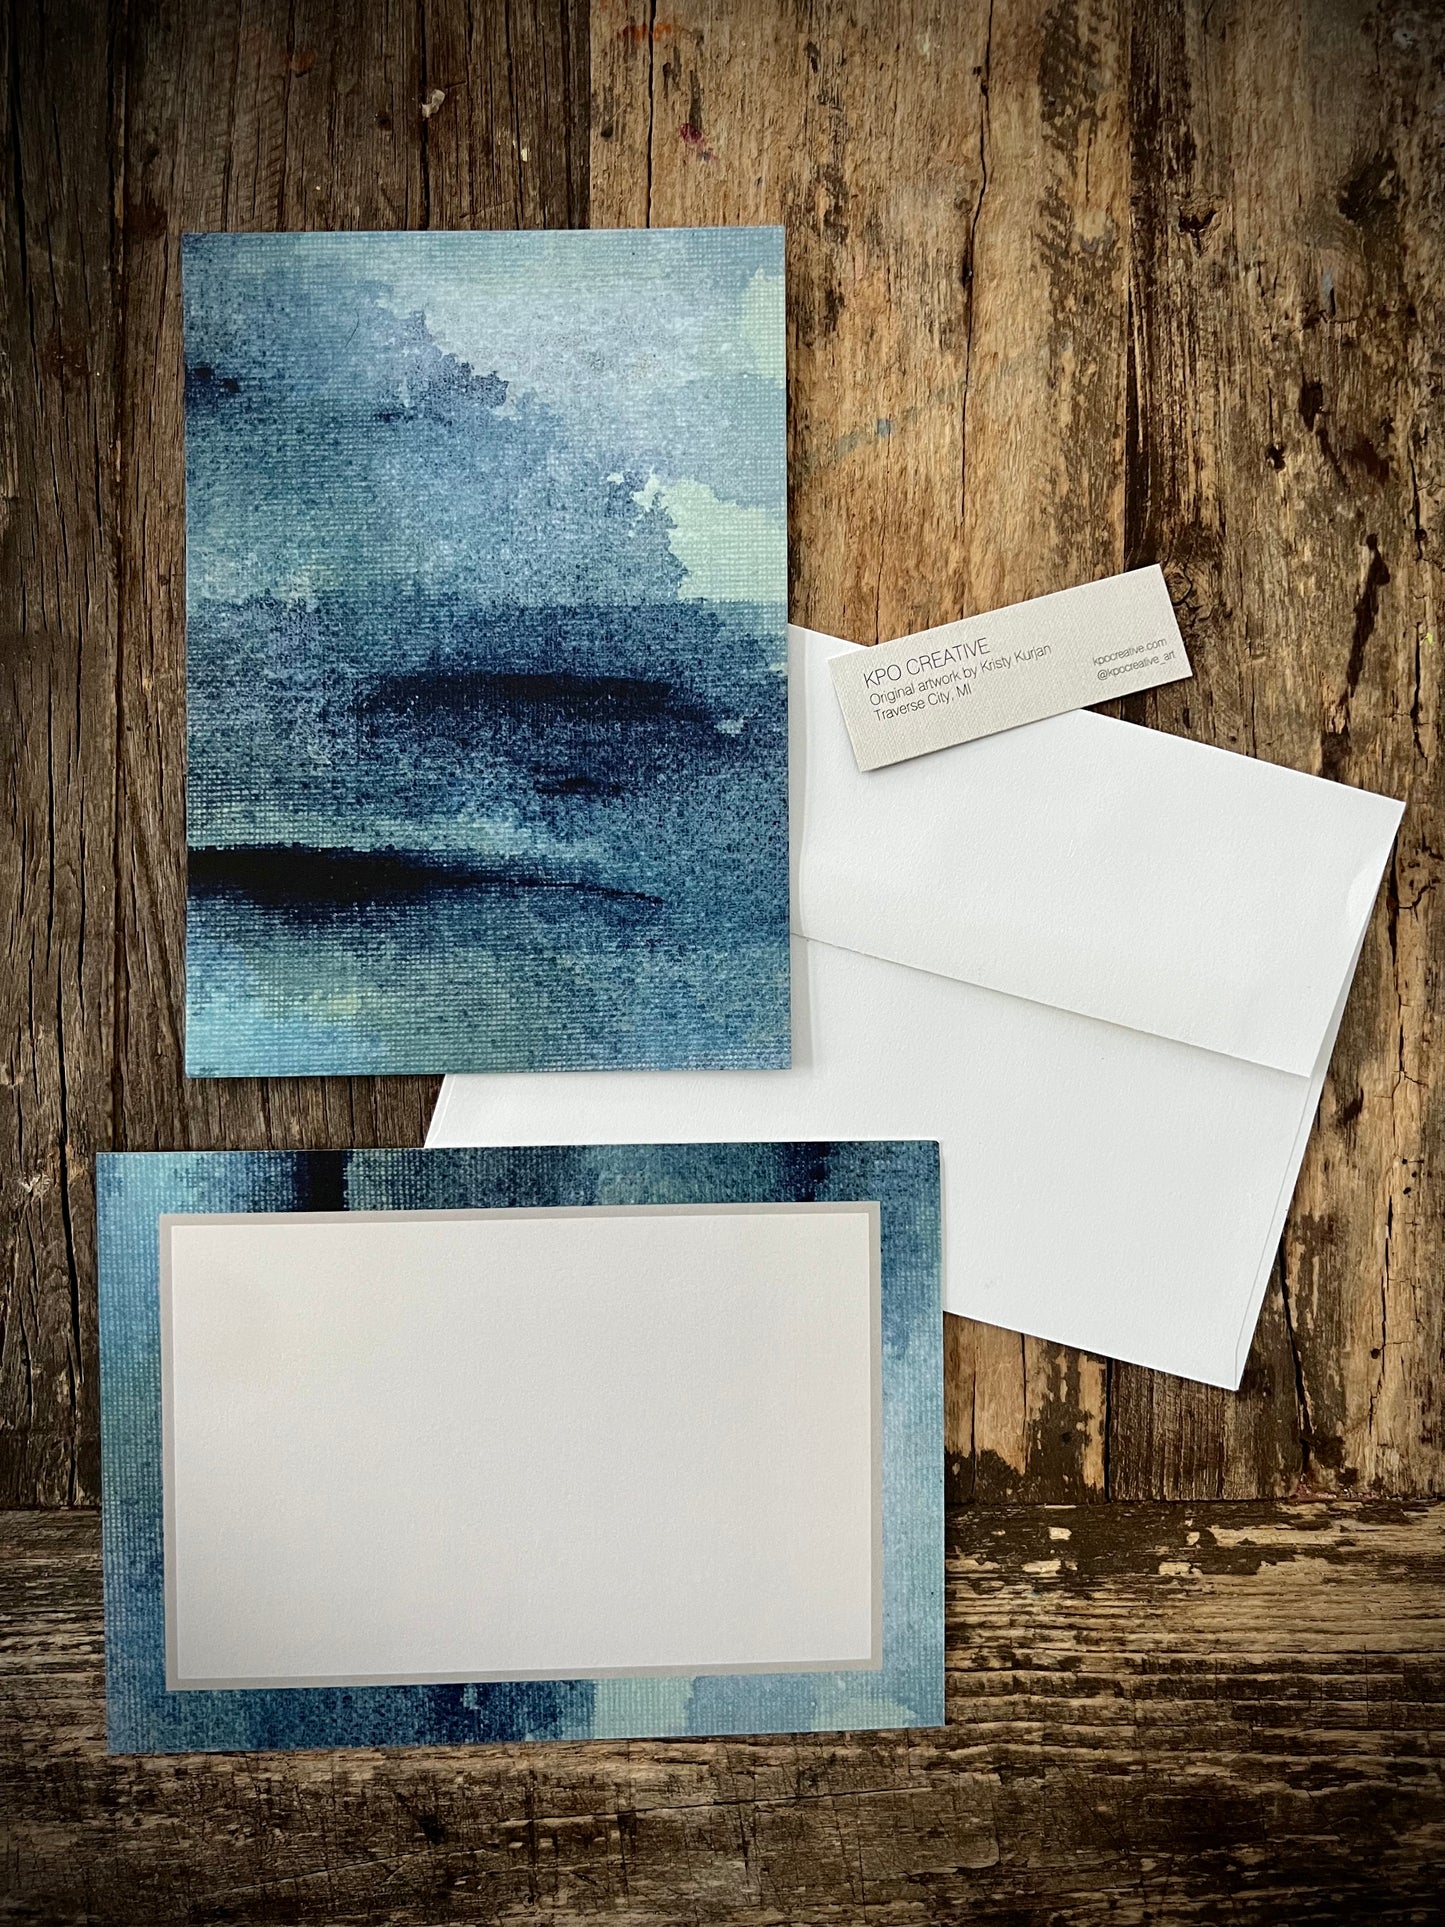 Set of 10 individually packaged art note cards 5” x 7” by Kristy Kurjan